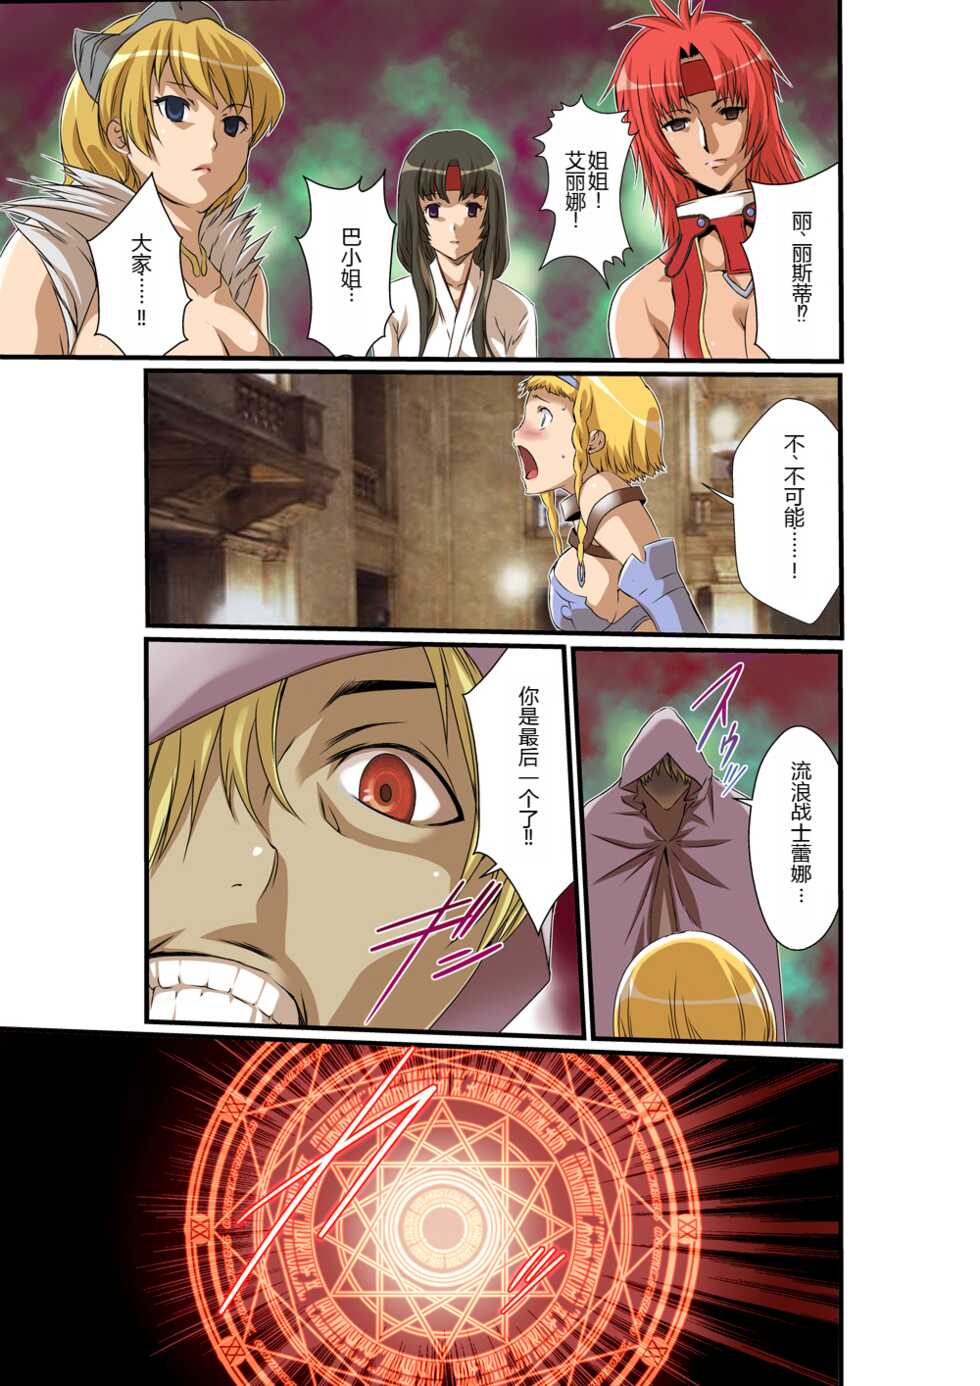 [Utsuro na Hitomi] Queen's *lade Mind-control Manga (Queen's Blade) [chinese] [lalala1234个人机翻汉化] - Page 21